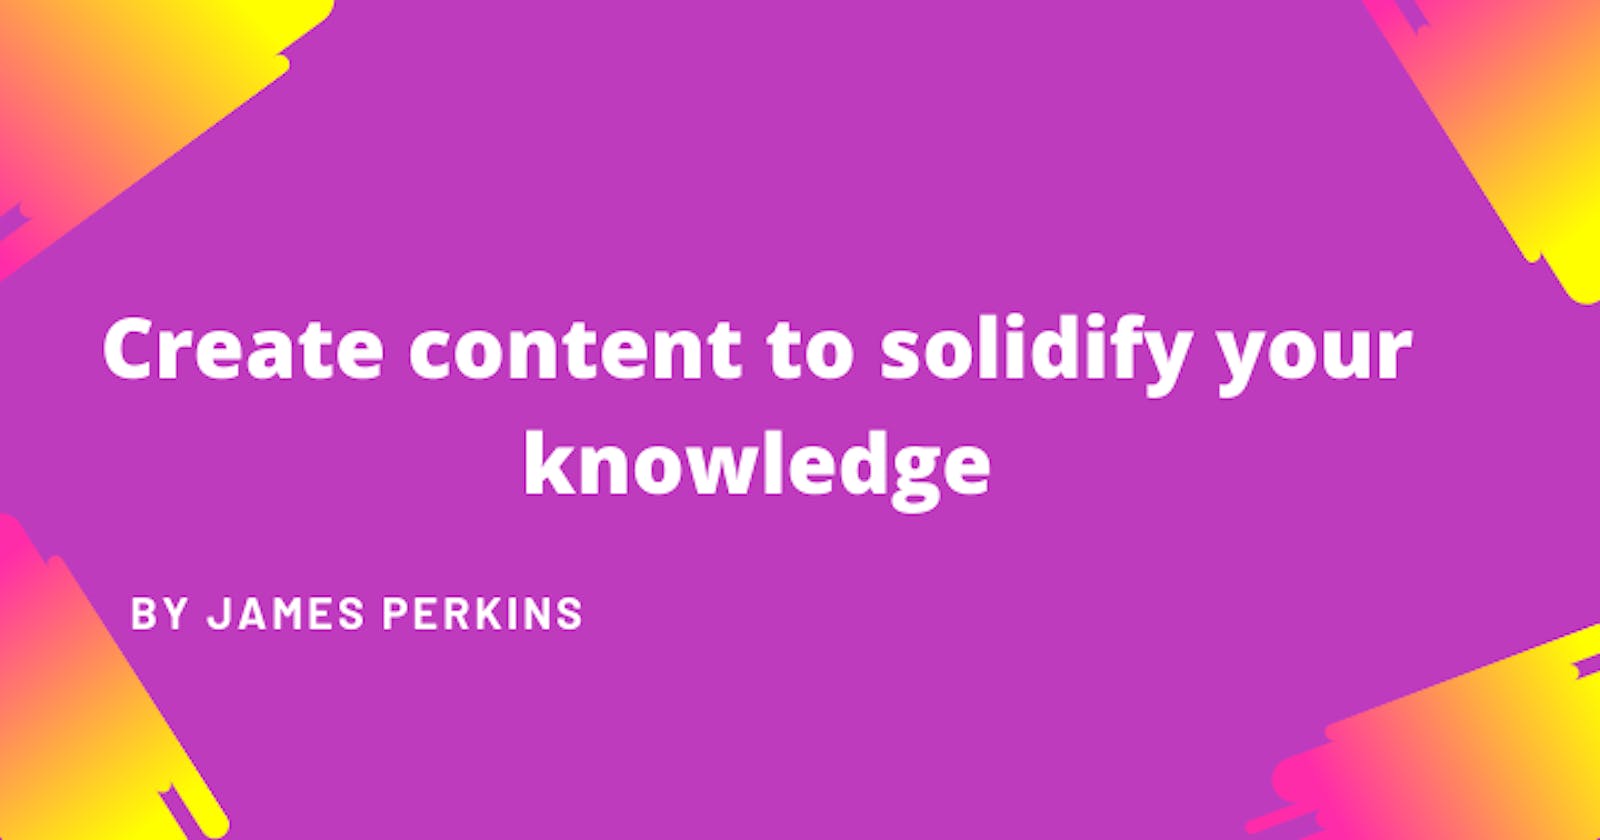 Create content to solidify your knowledge